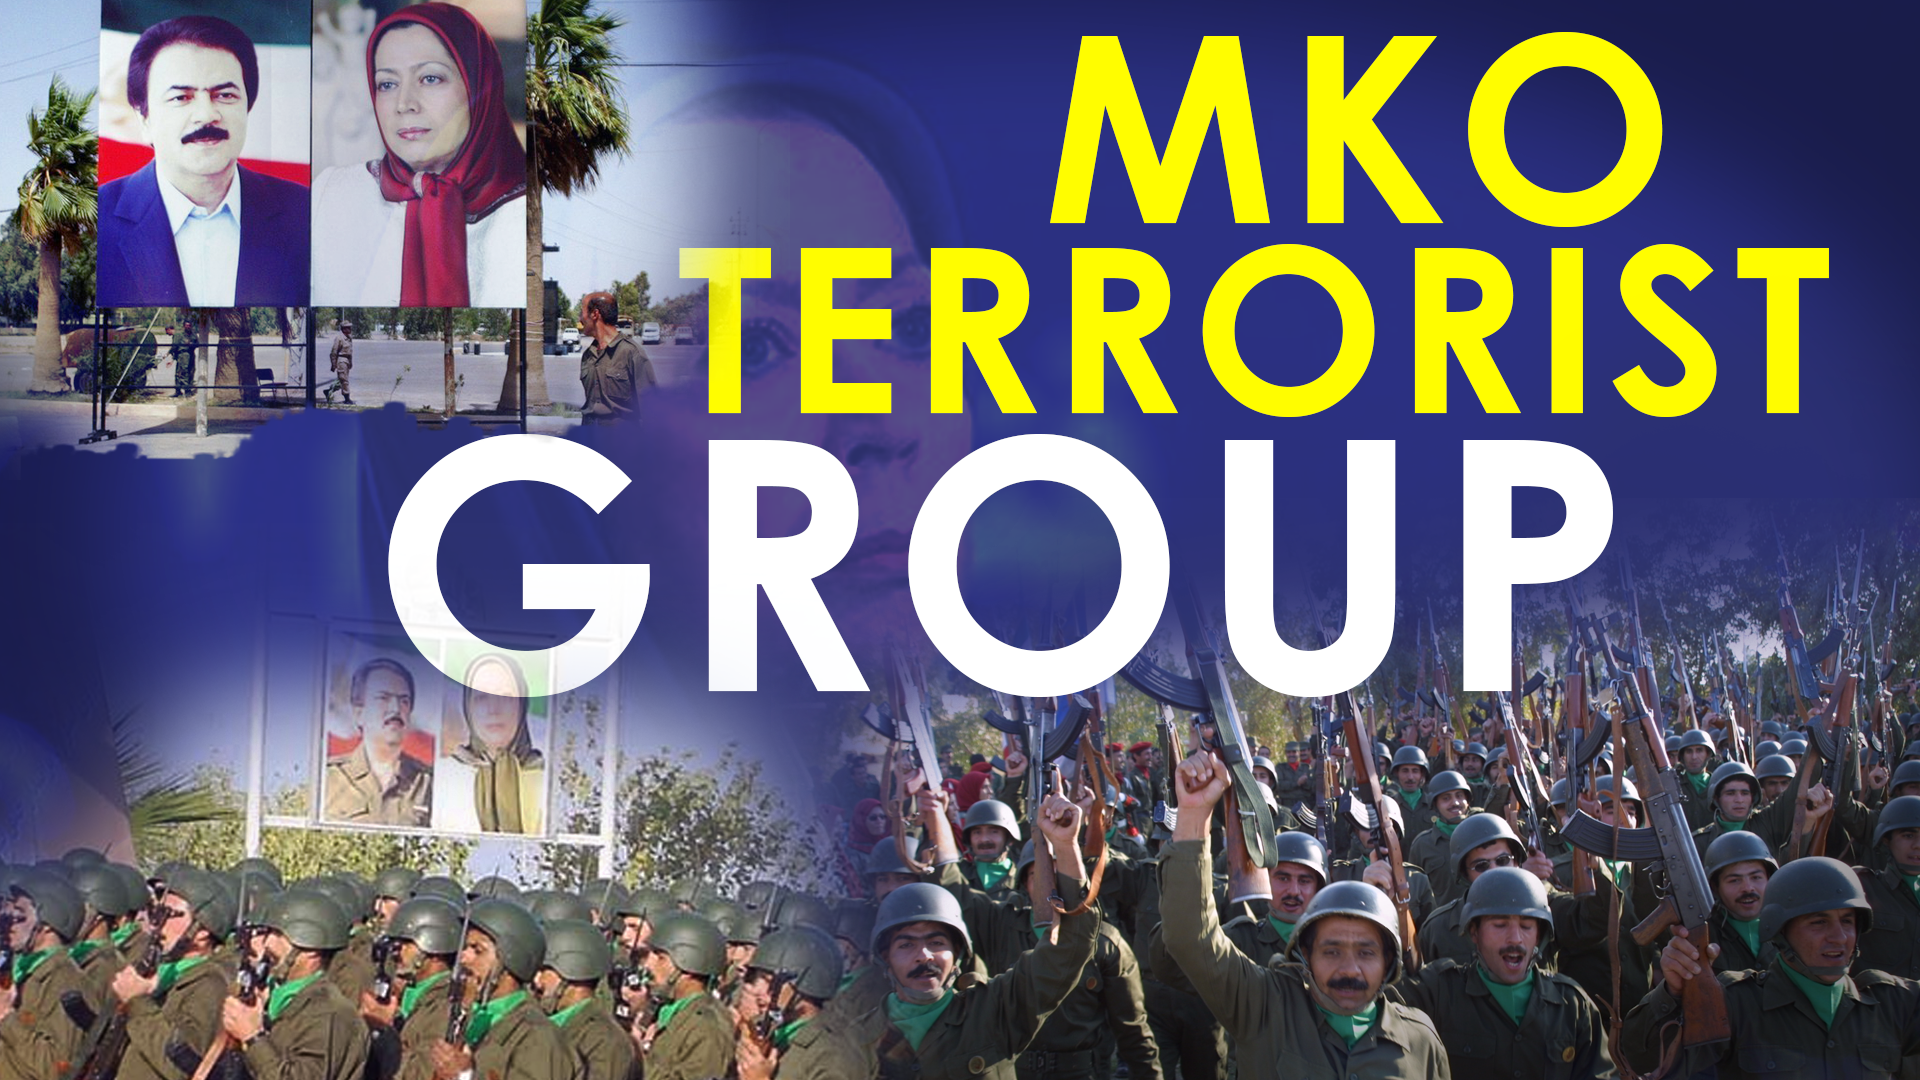 New revelations about MKO terrorist group